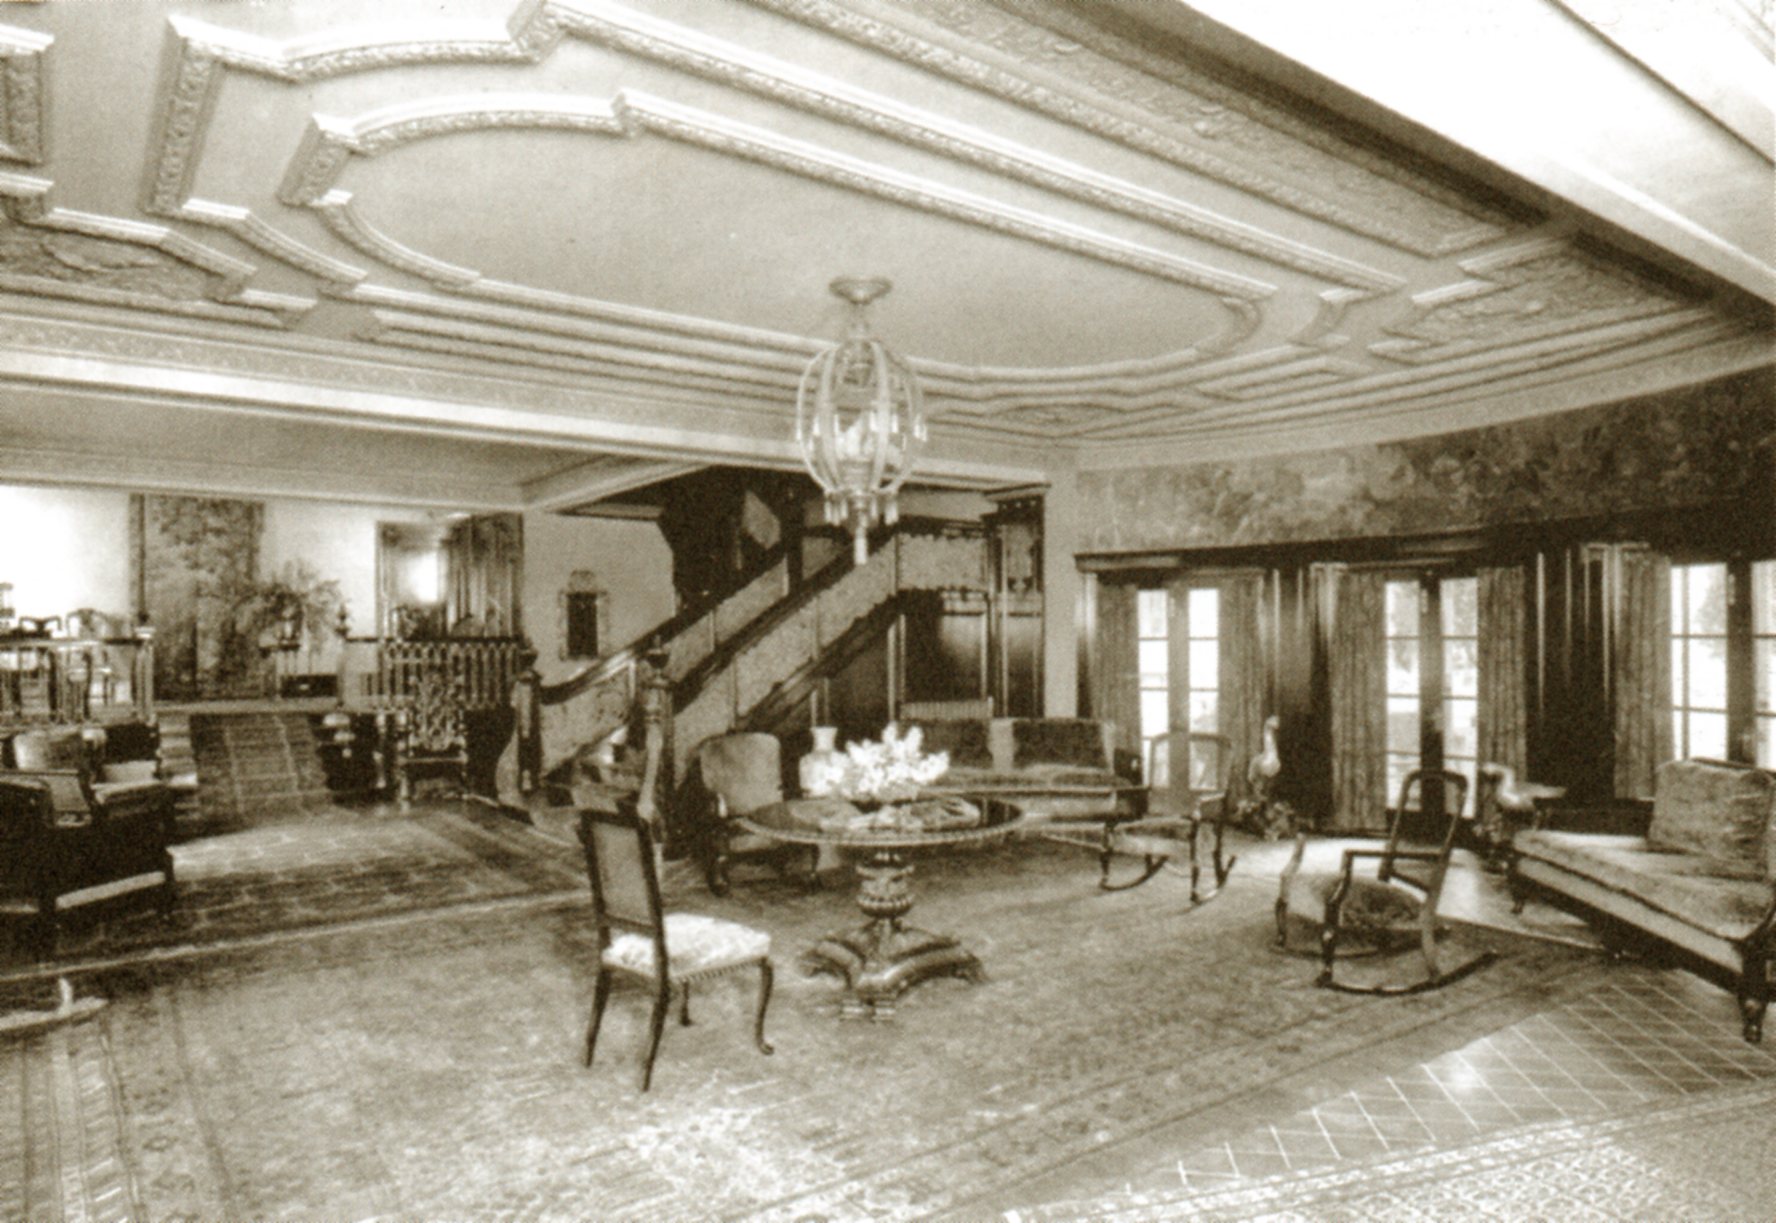 Lobby of the Garden Court Apartments at 7021 Hollywood Boulevard in 1926